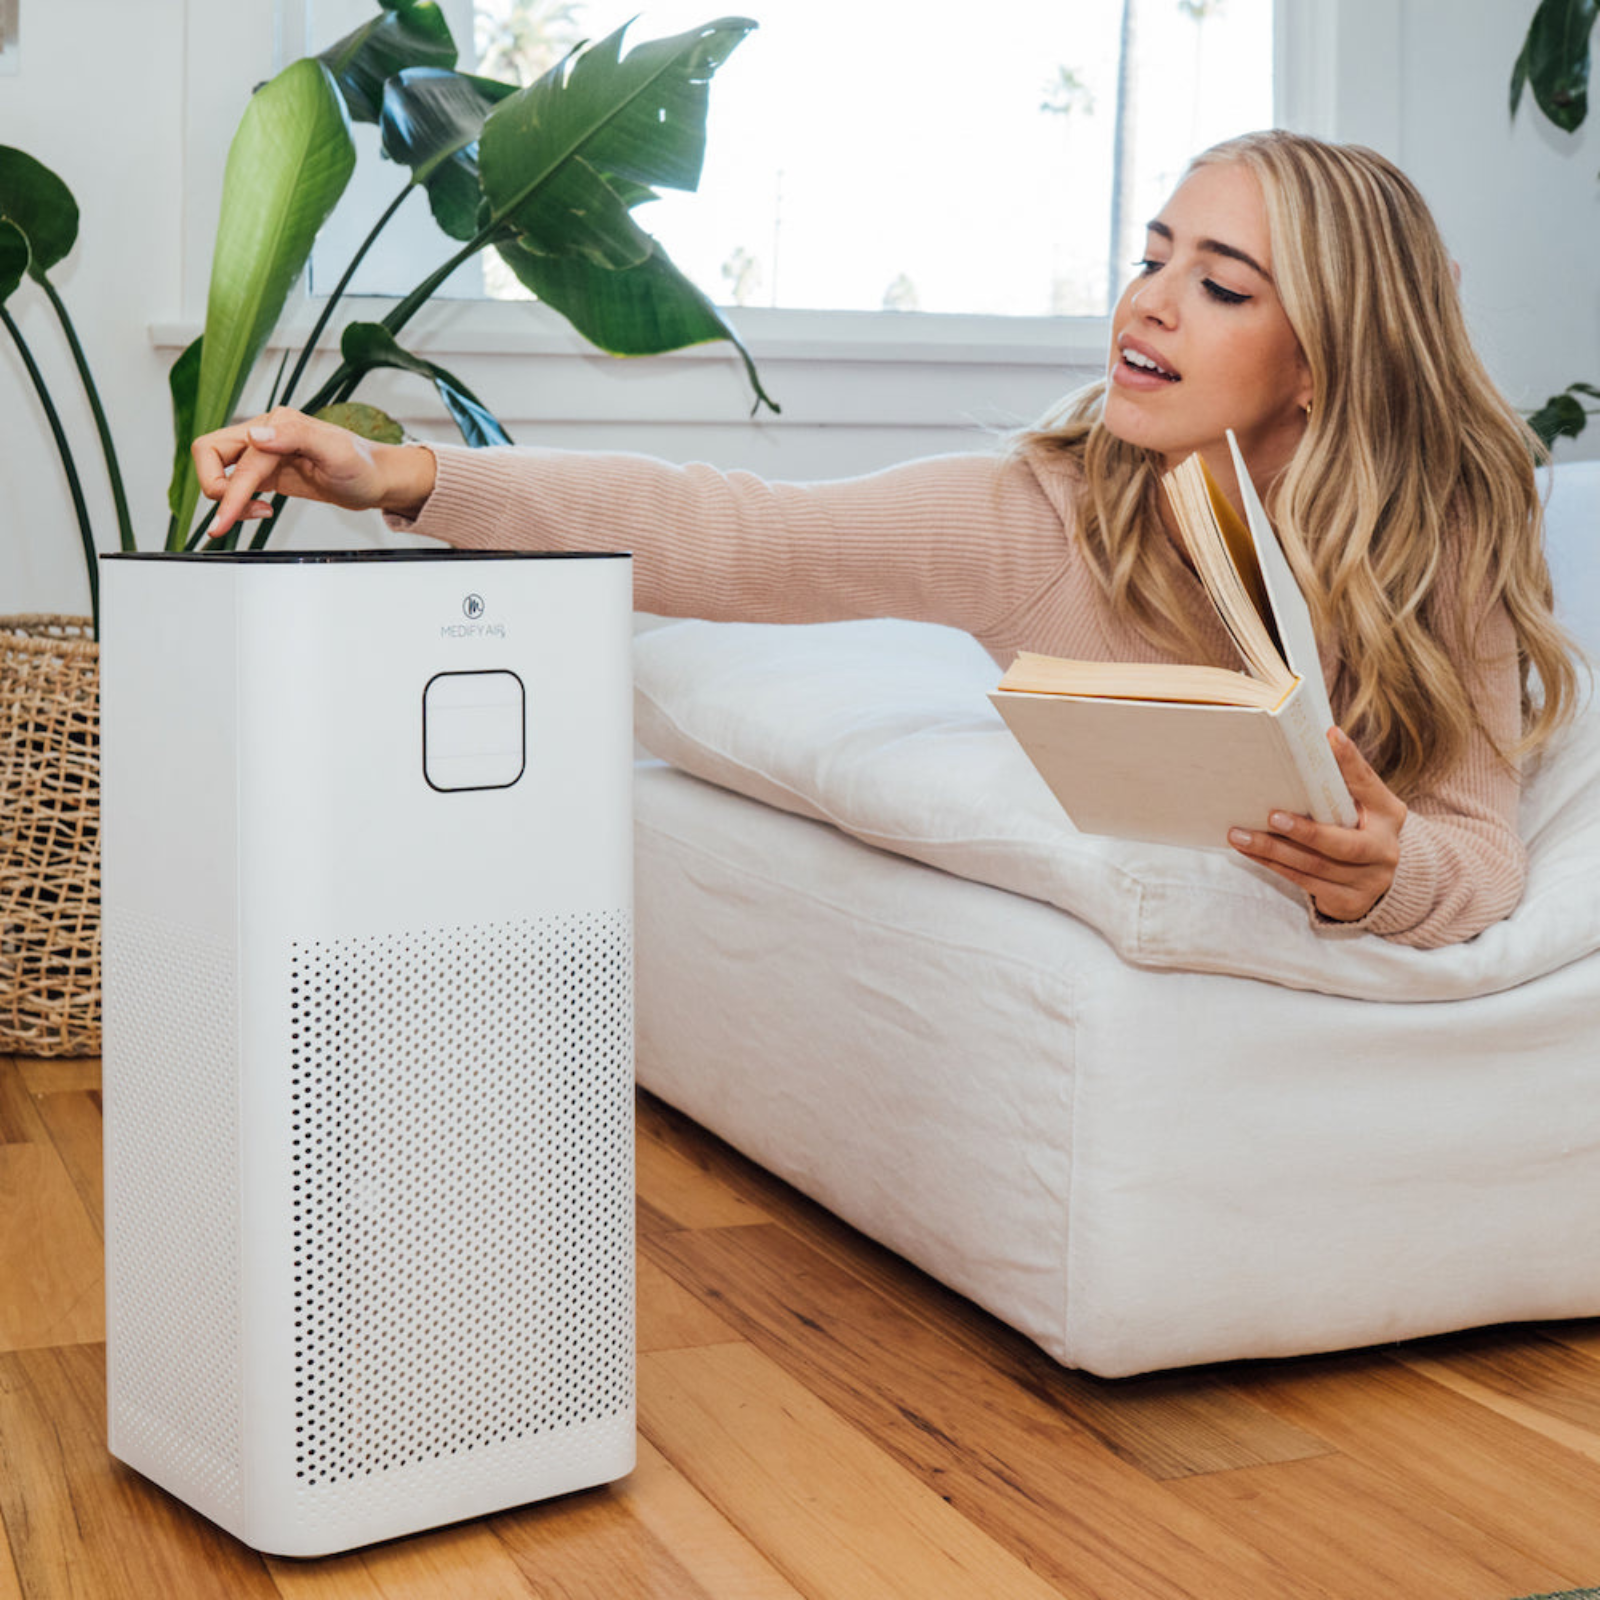 Medify Air White Large MA-50 True HEPA Air Purifier on Floor in Room with Person